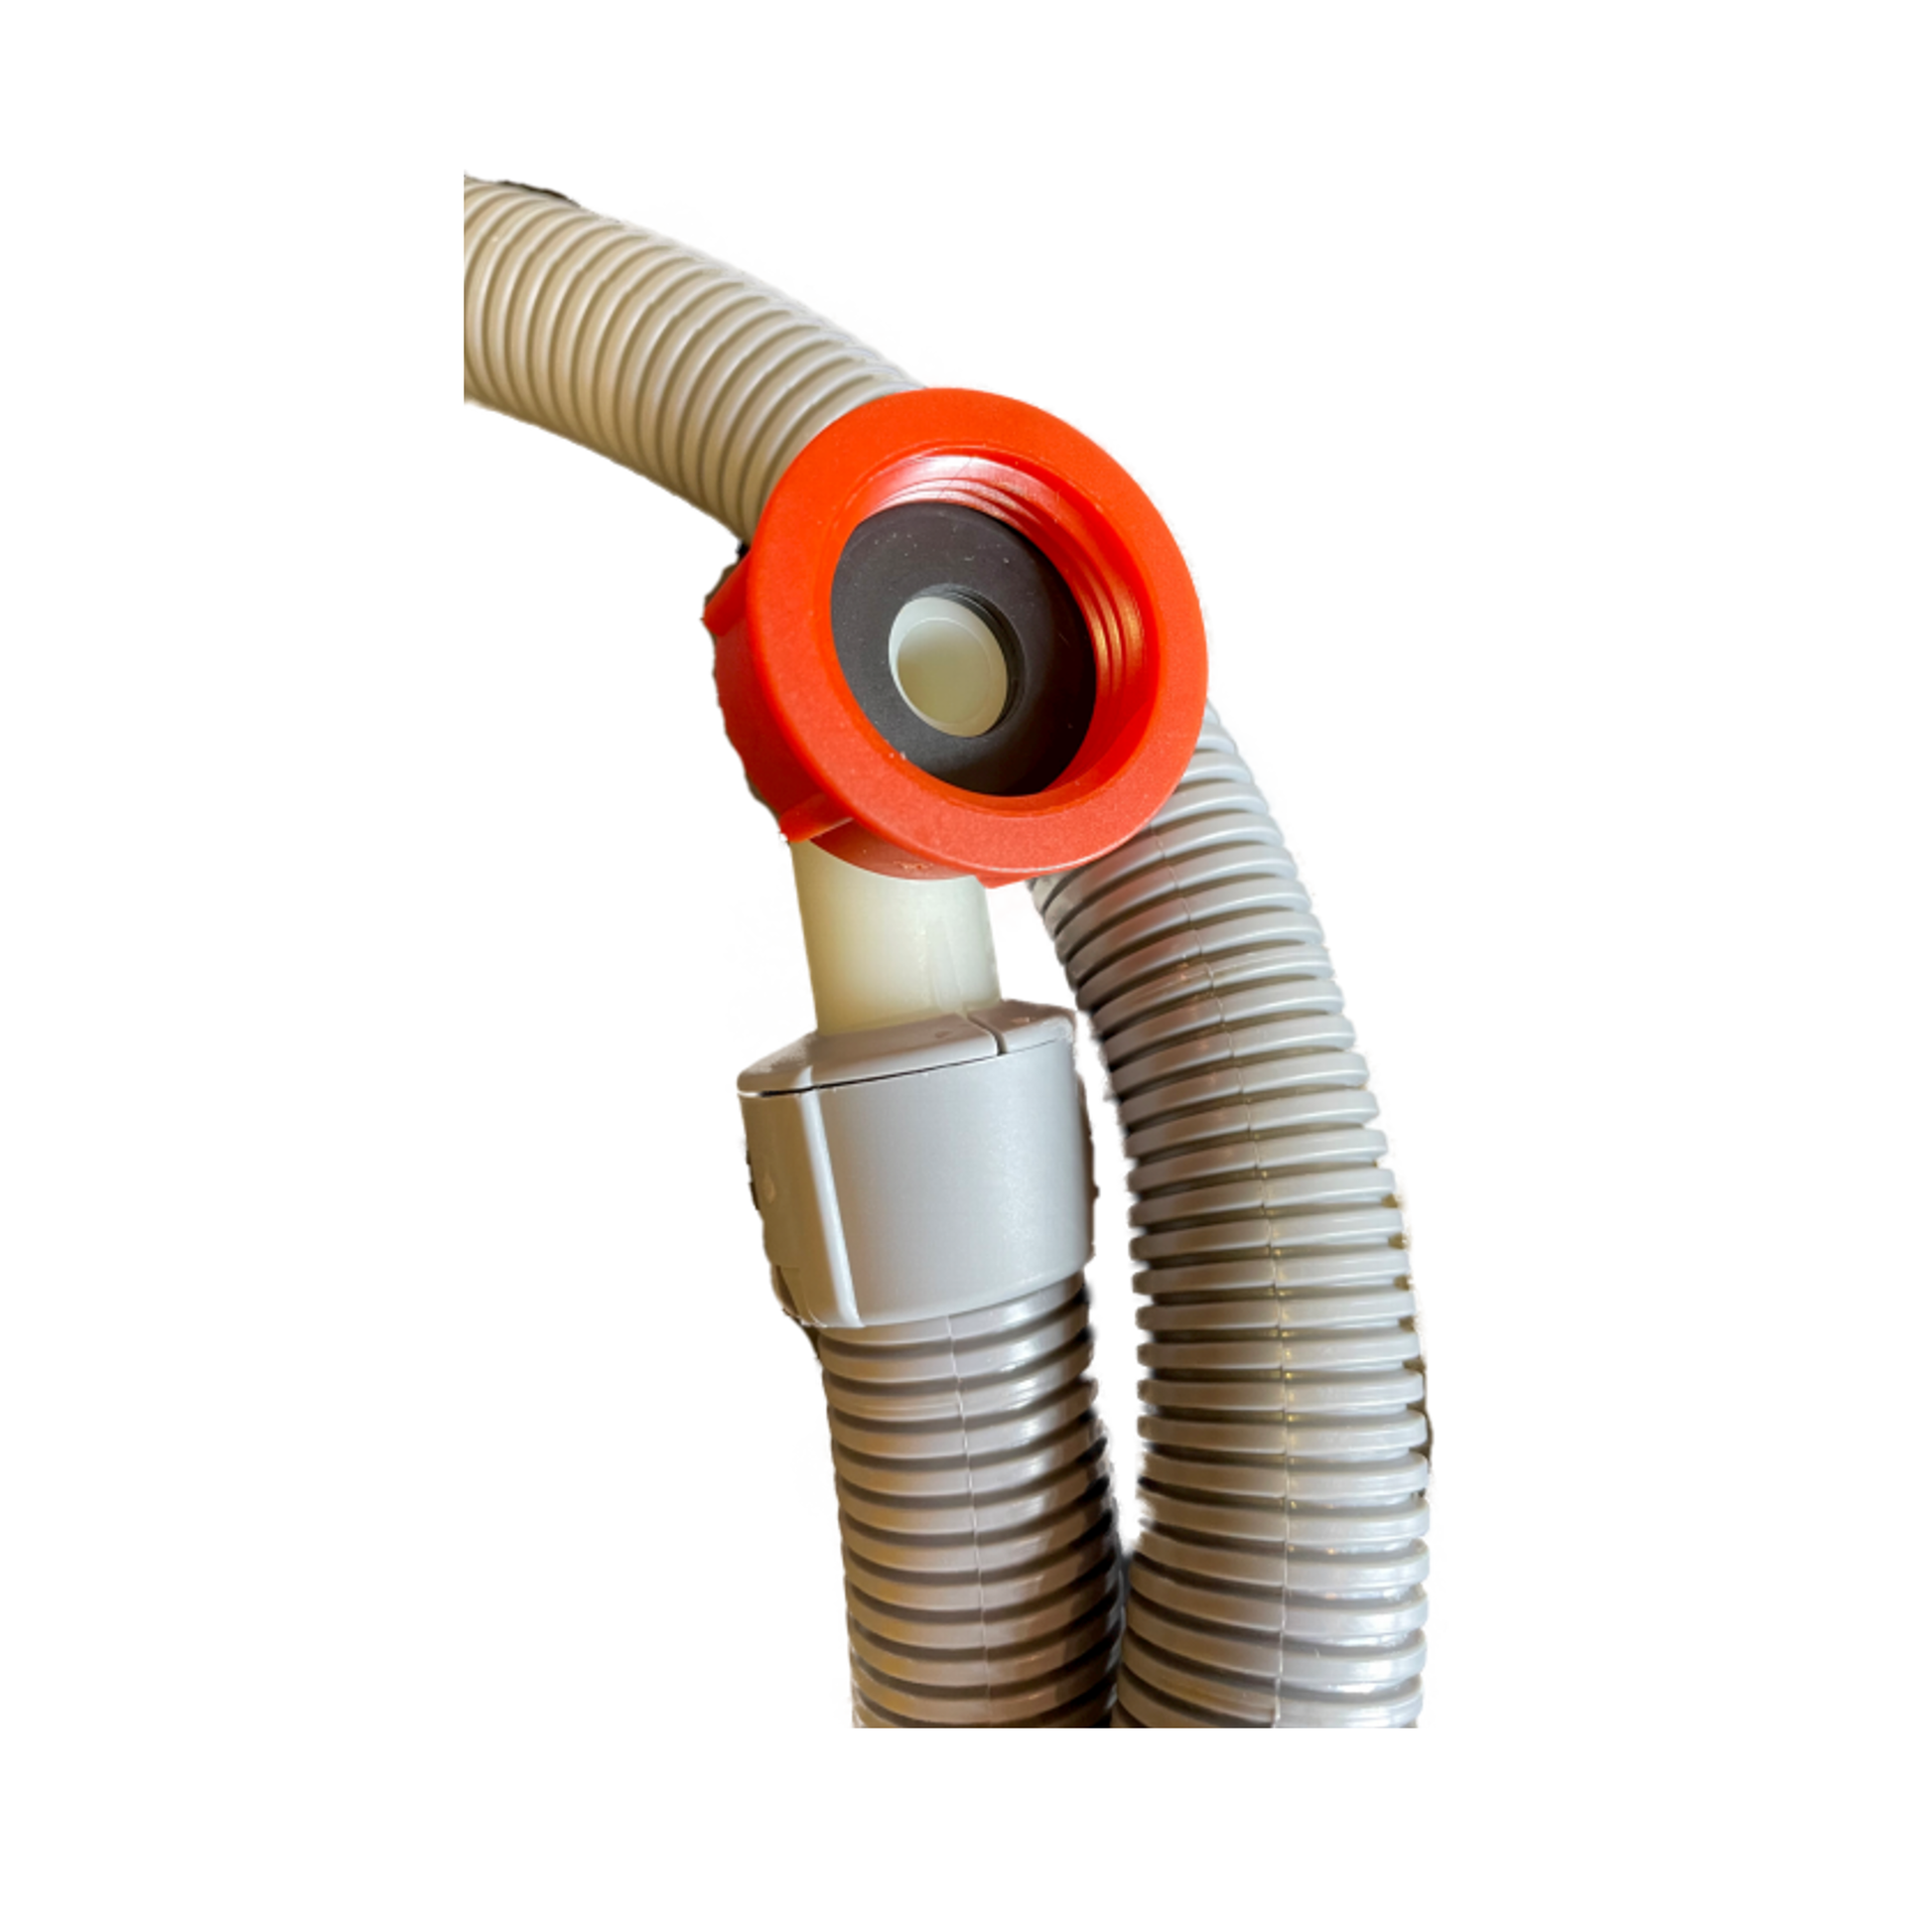 Eltek Group flood prevention hose for dishwashers, steam dryers, and steam ovens. Operates like a normal hot water supply hose. Built-in water leak shutoff.